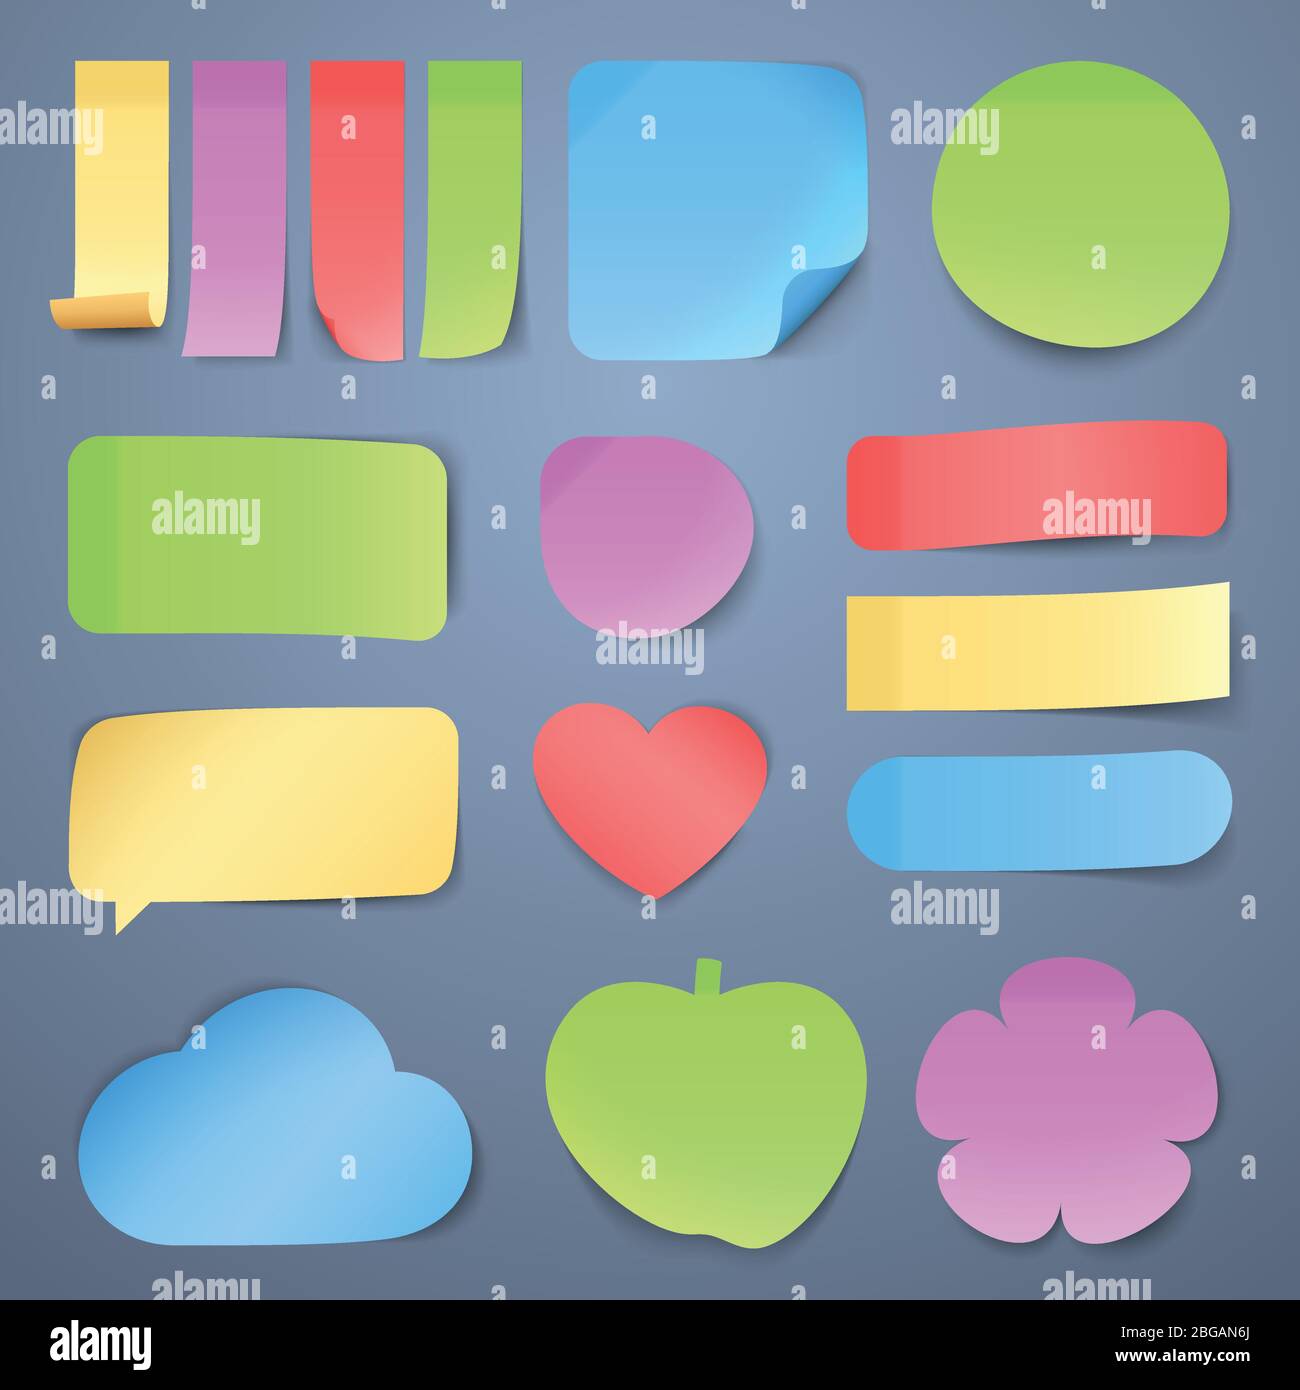 Post it notes Vectors & Illustrations for Free Download